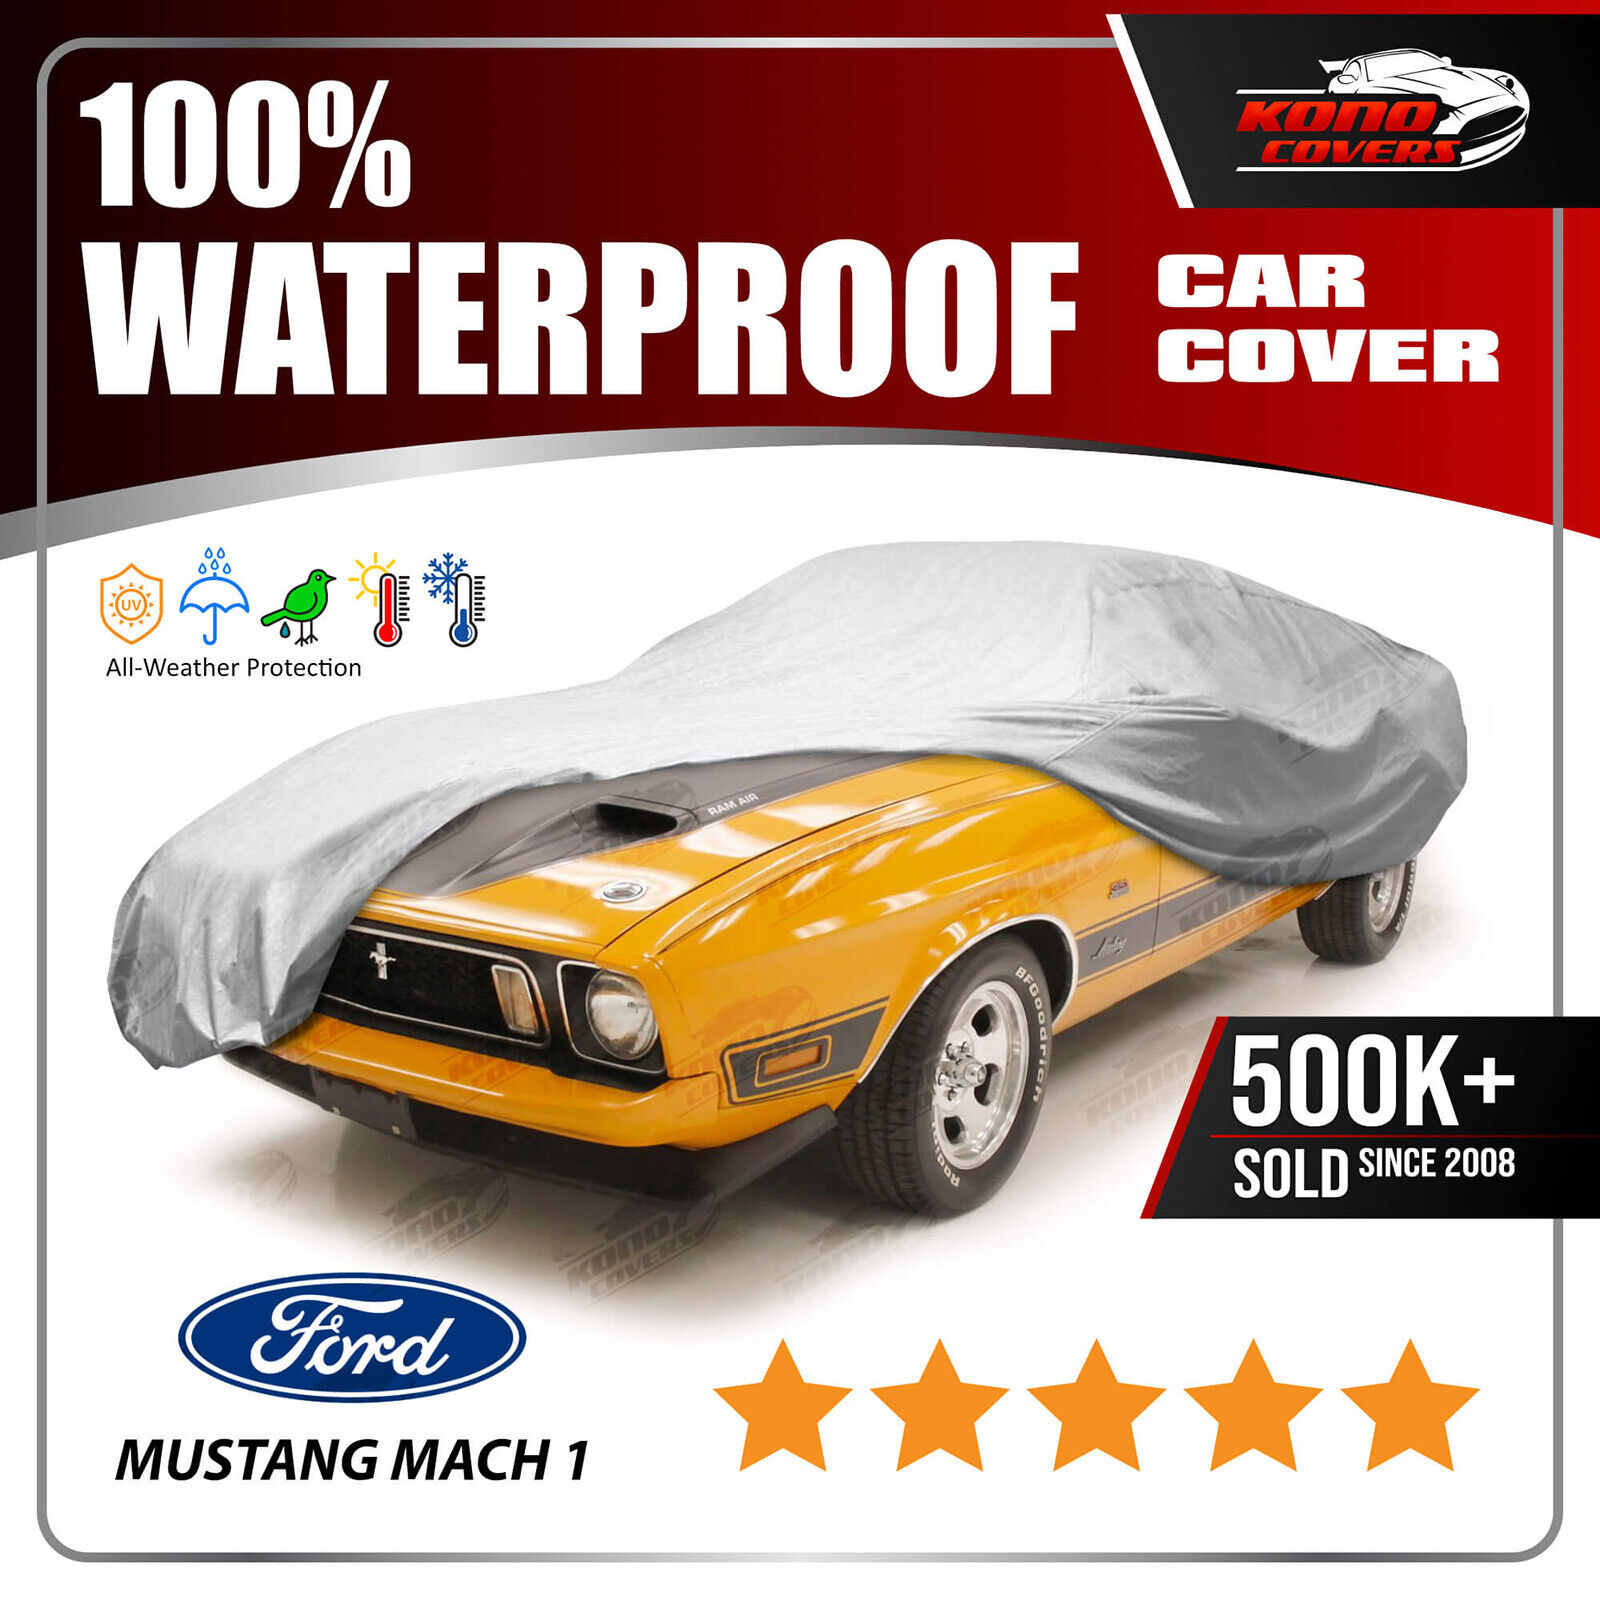 FORD MUSTANG MACH 1 1971-1973 CAR COVER - 100% Waterproof 100% Breathable